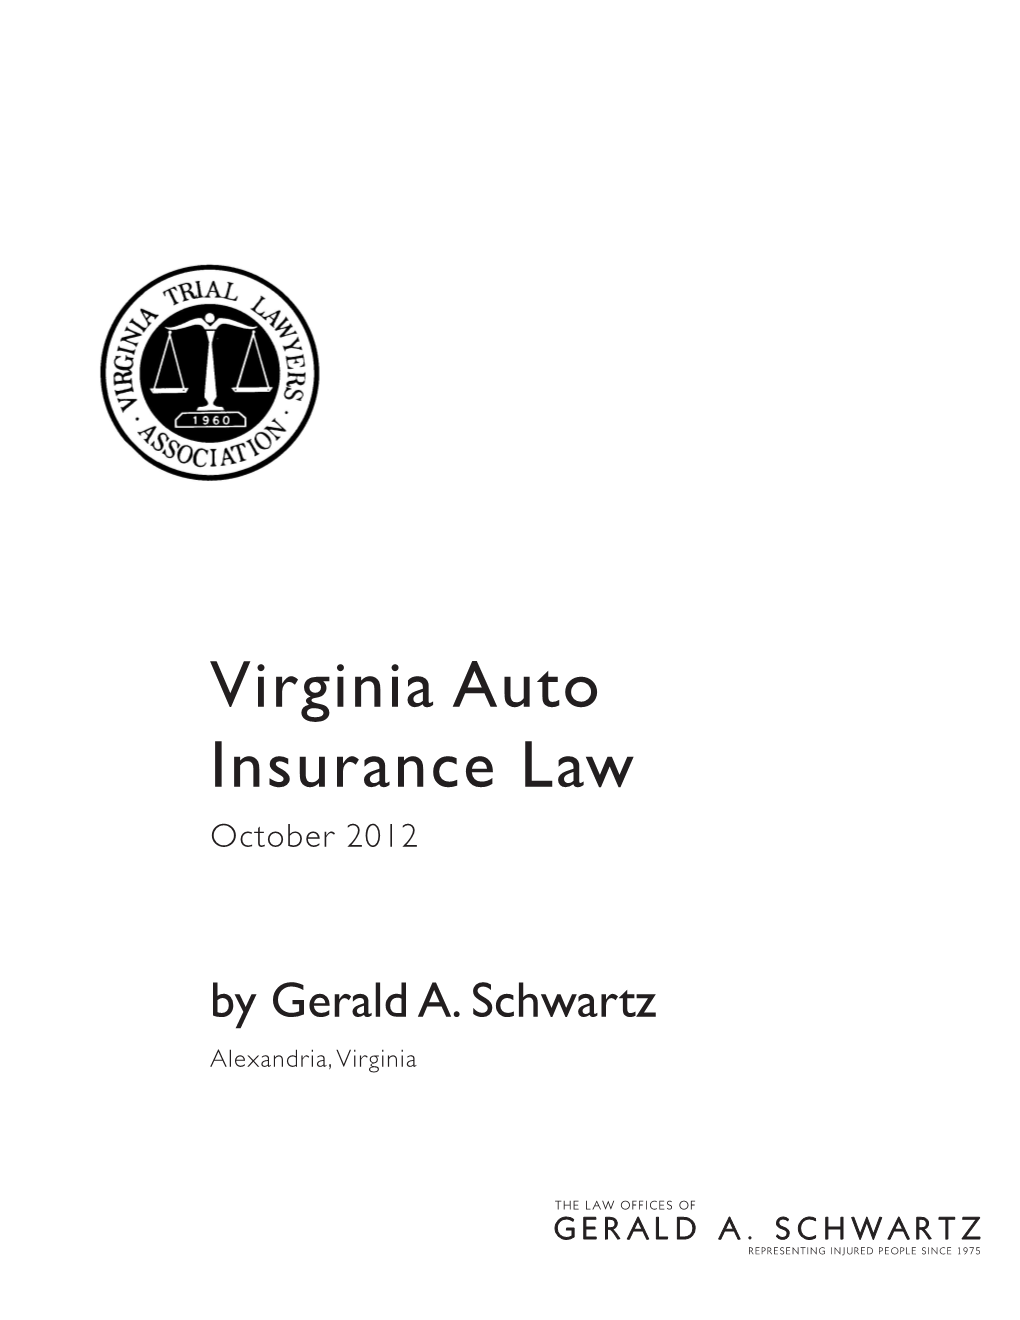 Virginia Auto Insurance Law October 2012 by Gerald A